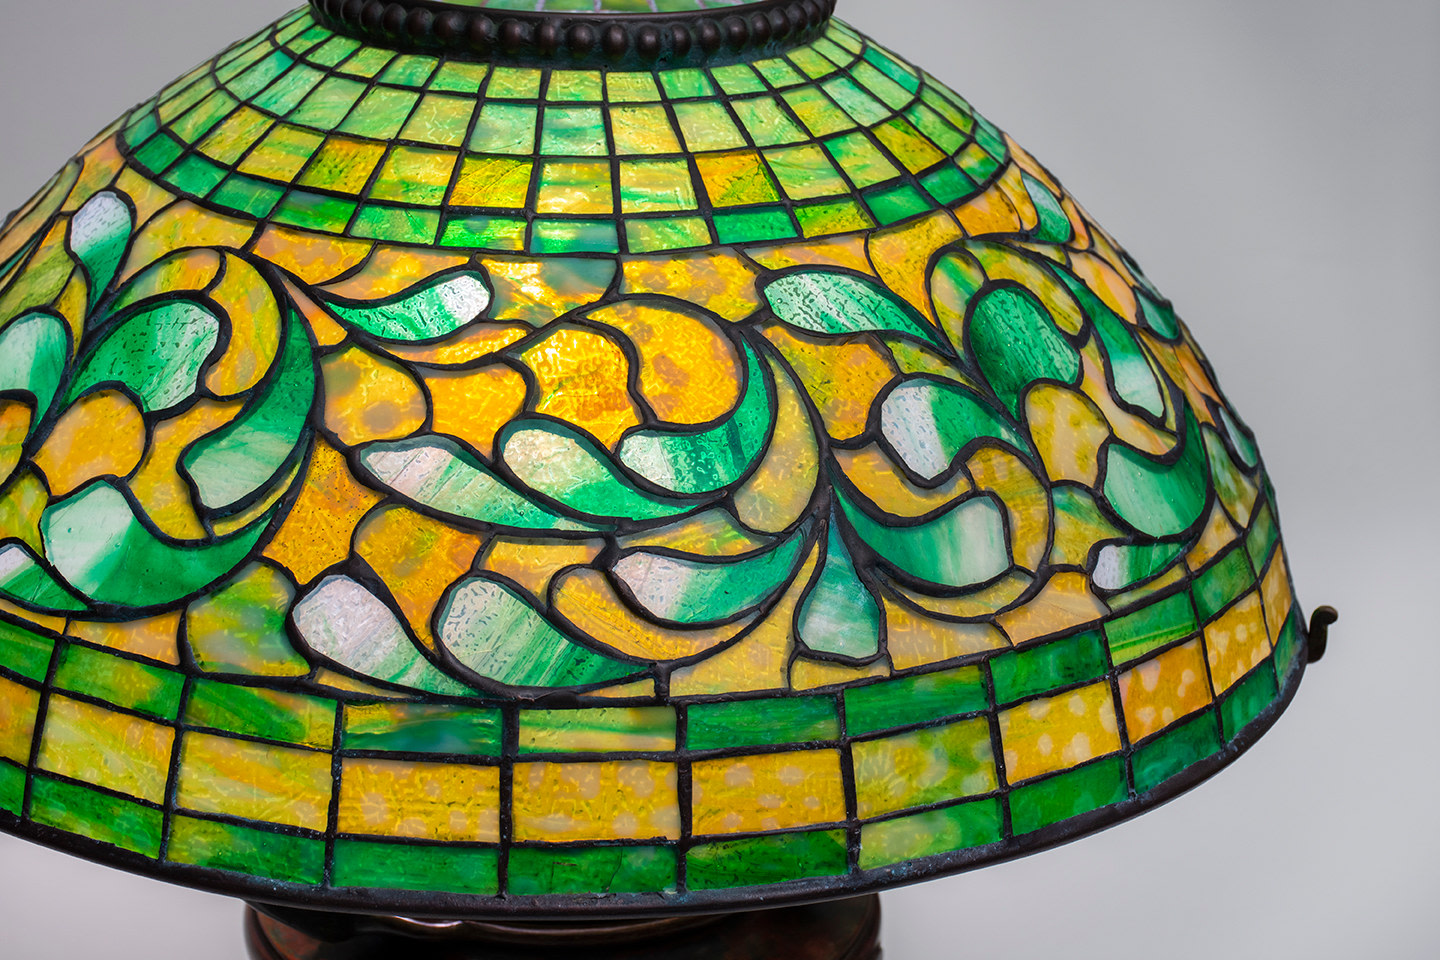 Early Swirling Leaf Table Lamp